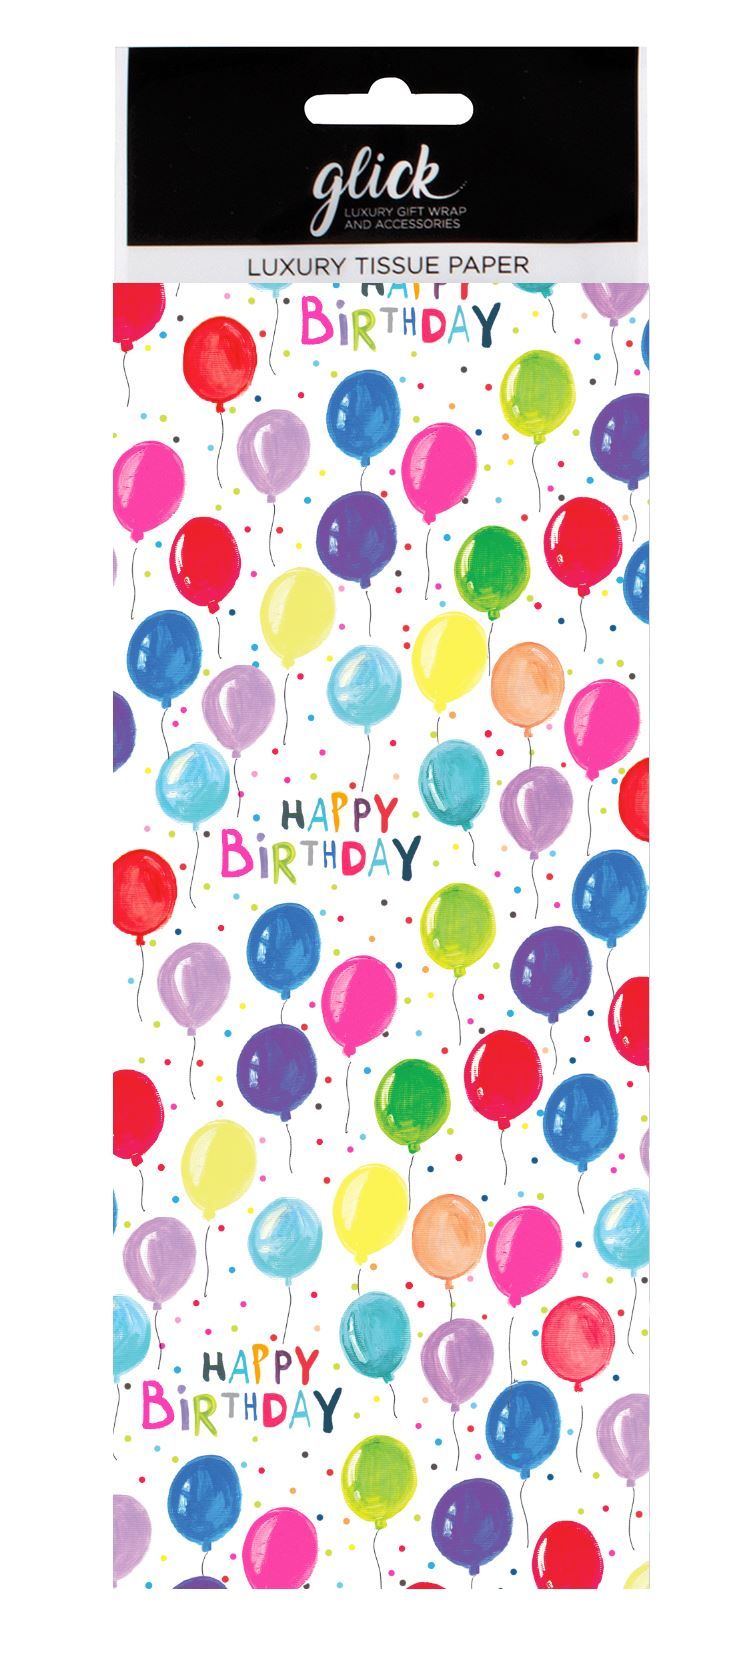 HAPPY BIRTHDAY BALLOON PARTY TISSUE PAPER GIFT WRAPPING LARGE SHEETS 50cm x 75cm 